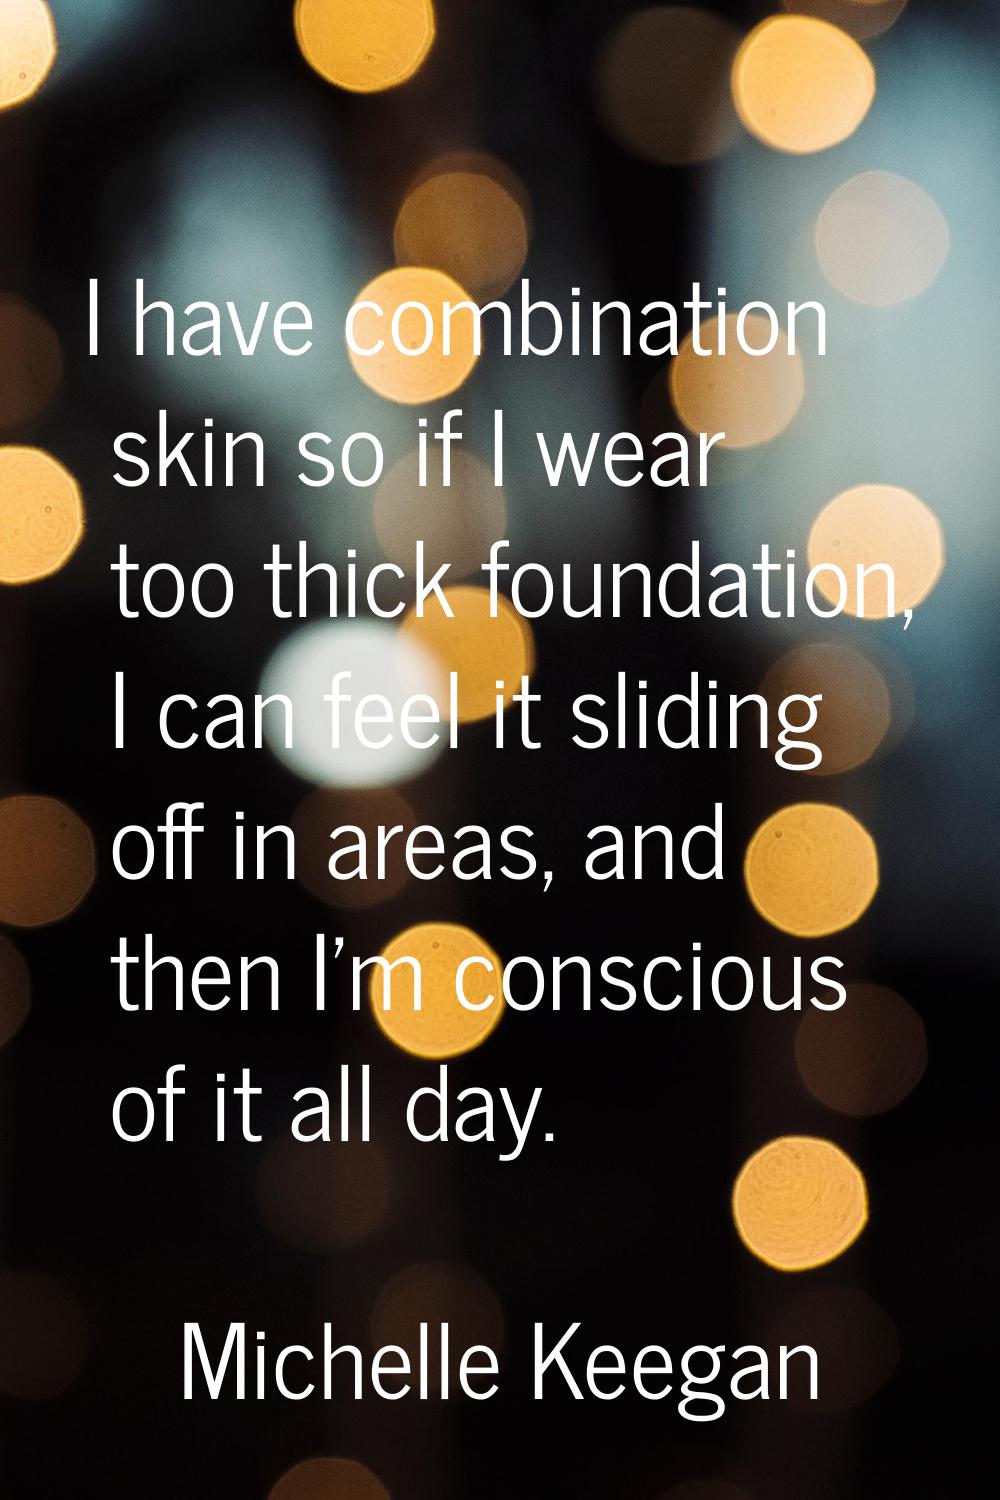 I have combination skin so if I wear too thick foundation, I can feel it sliding off in areas, and 